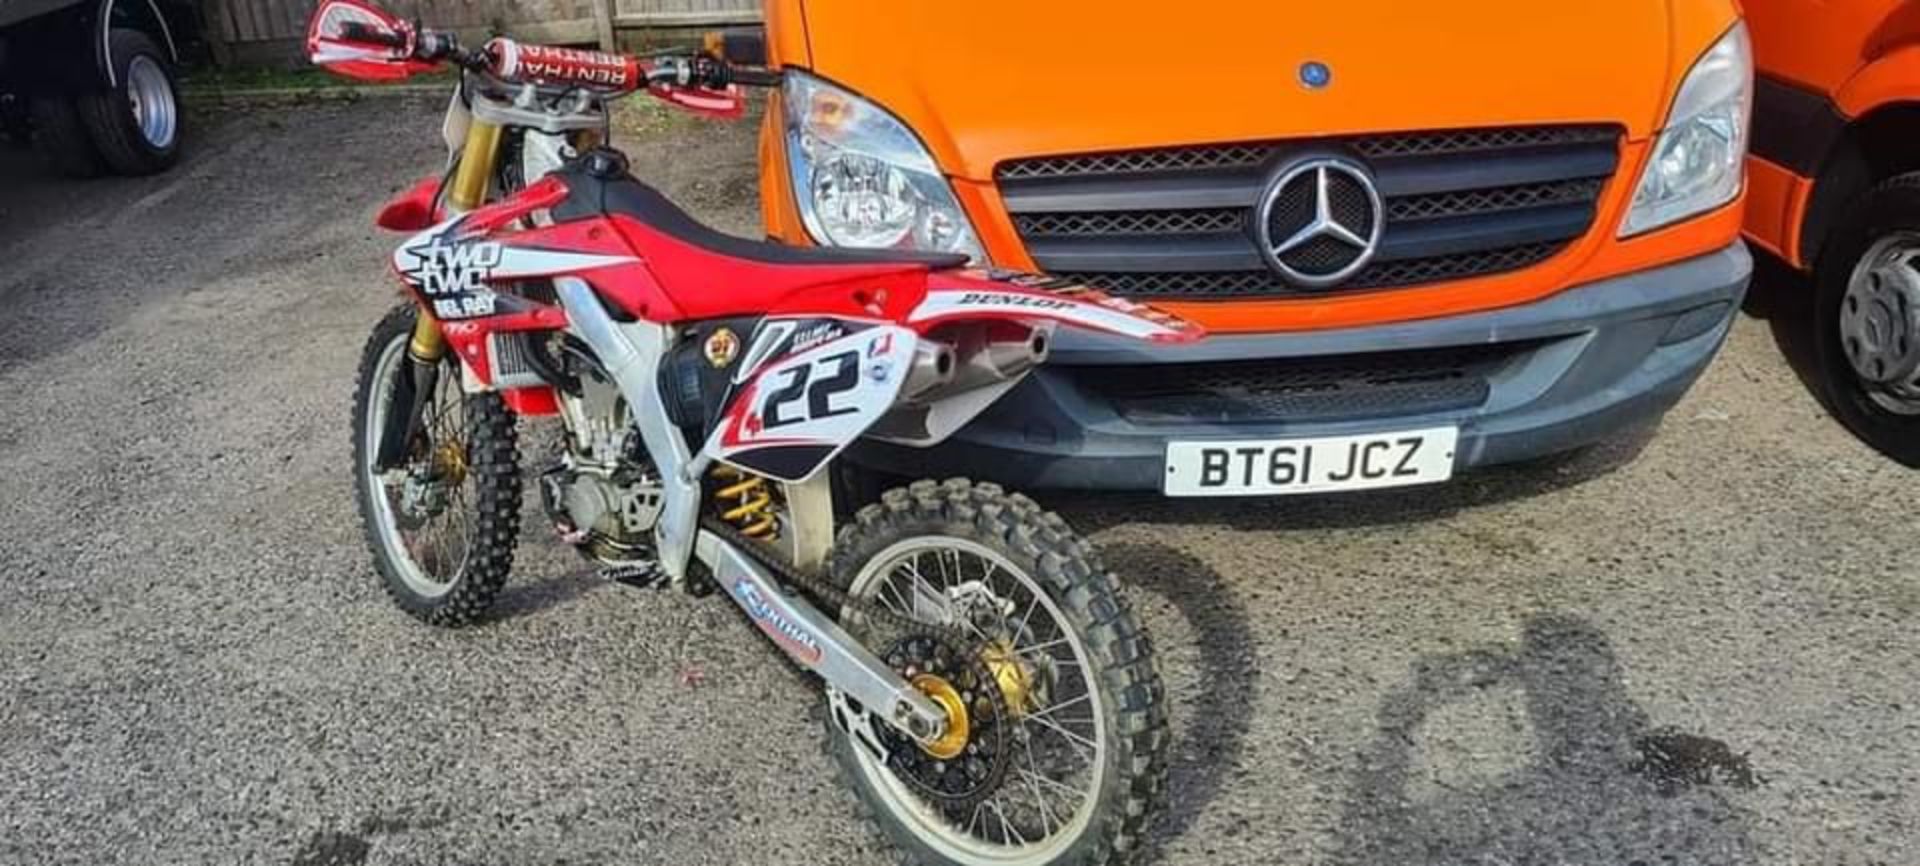 2007 HONDA CRF 250 TWIN PIPE MOTORCYCLE, VERY CLEAN LOOKED AFTER BIKE FOR ITS AGE *NO VAT* - Image 3 of 4